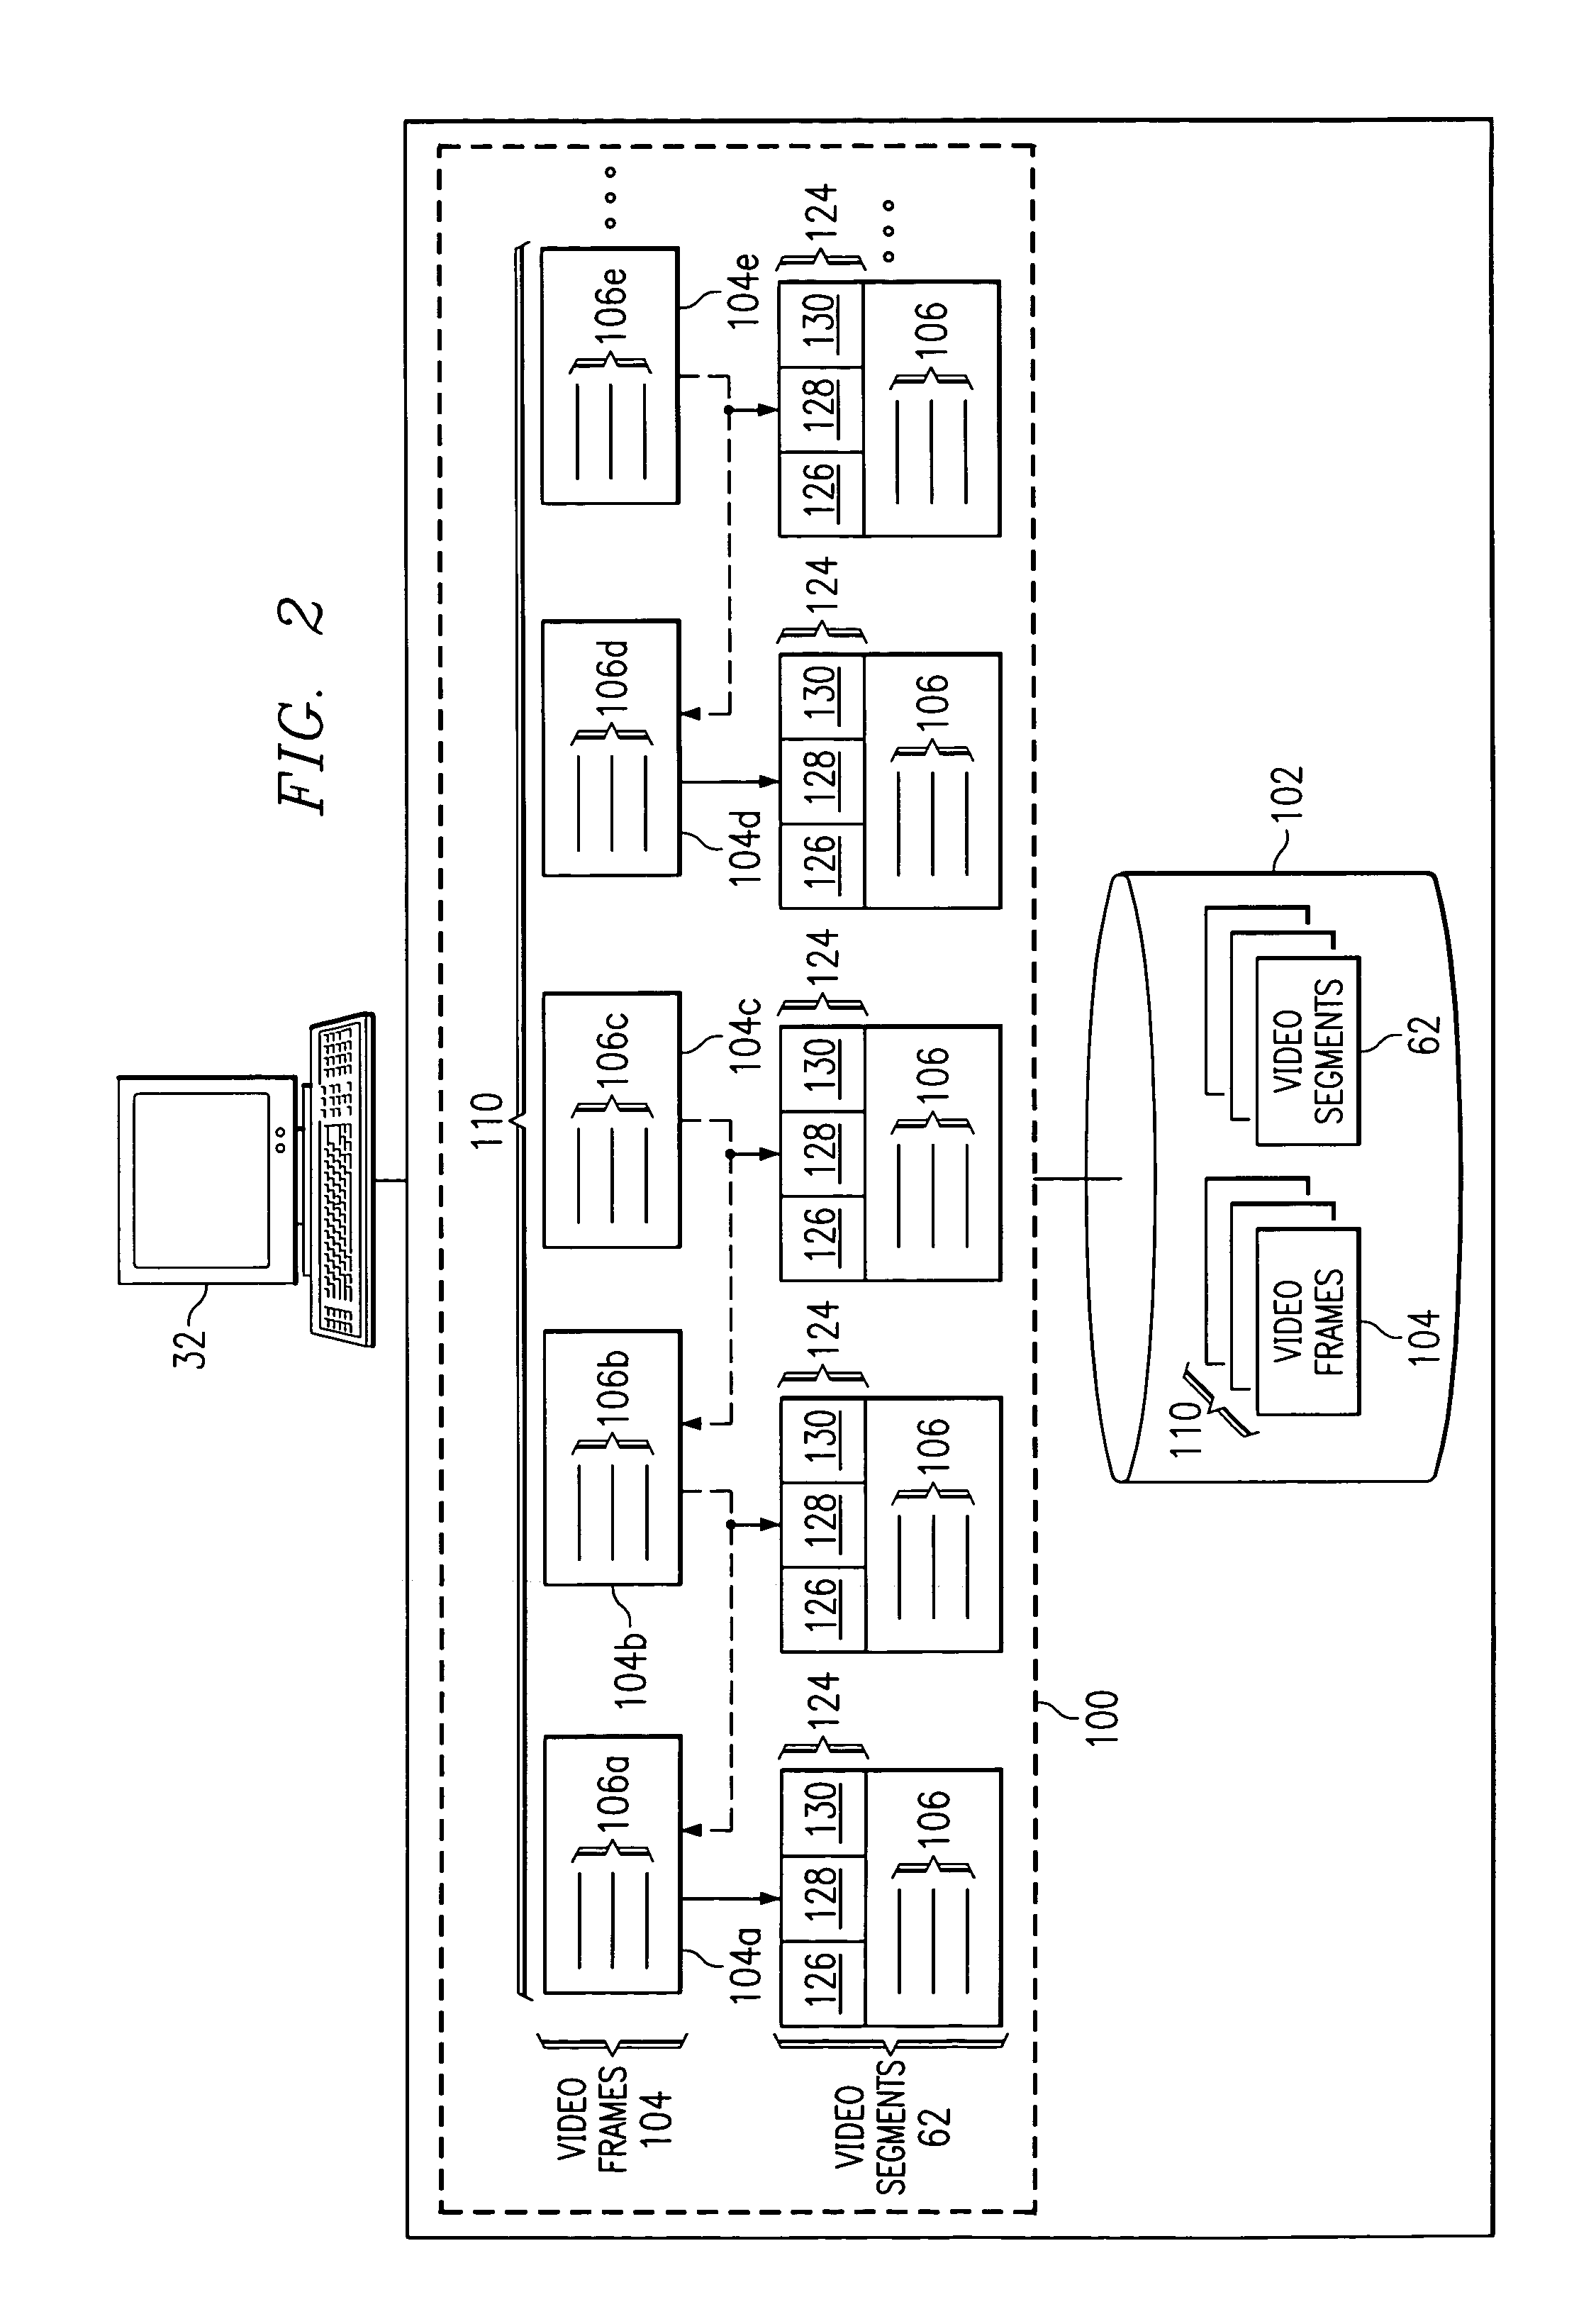 System and method for reproducing a video session using accelerated frame recording